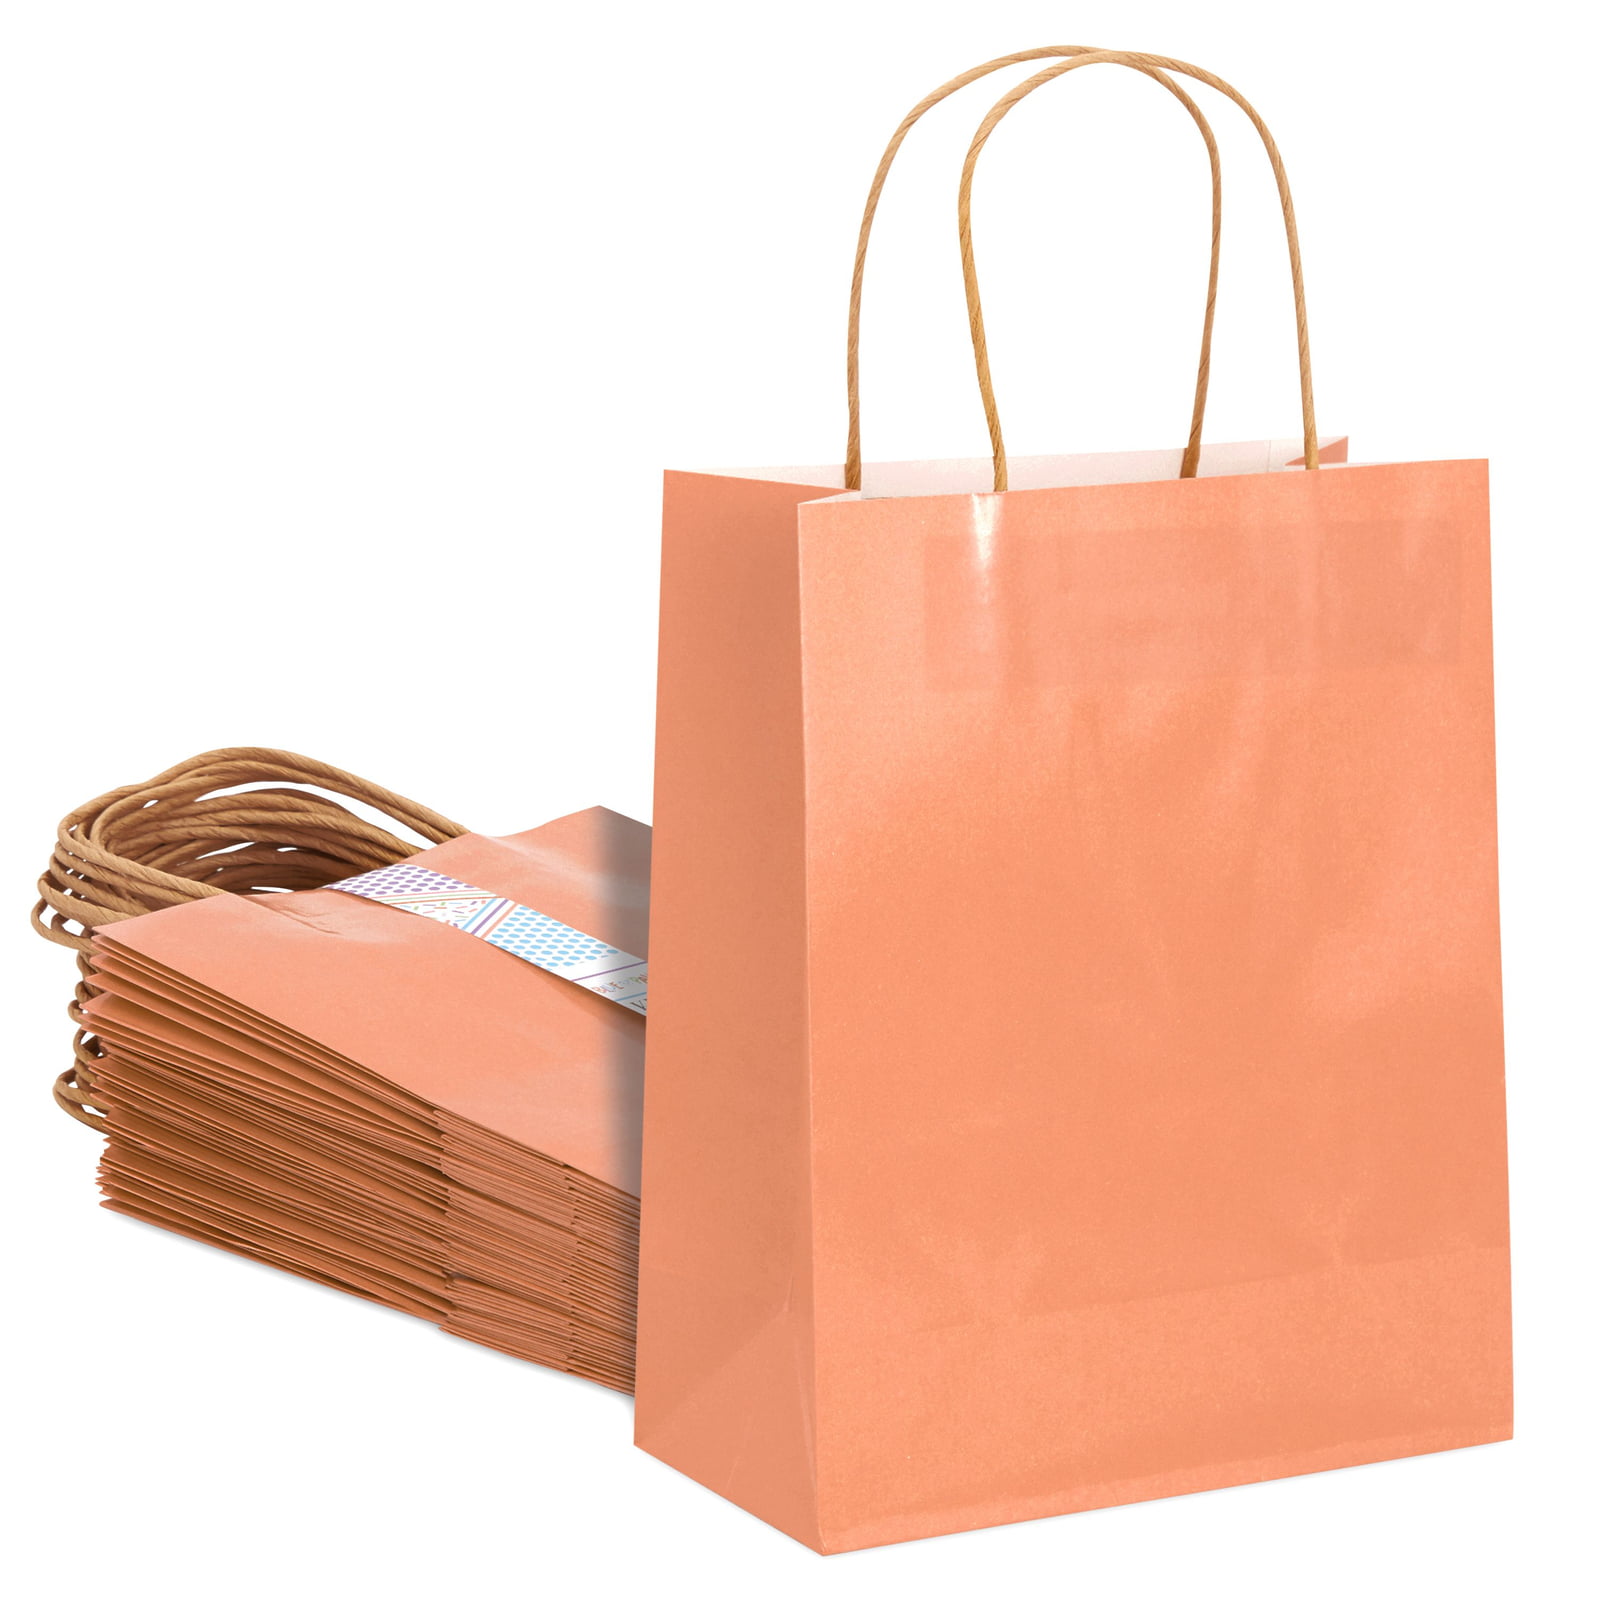 8 x 4 x 10 In, 24 Pack Birthdays Rose Gold Gift Bags with Handles for Weddings